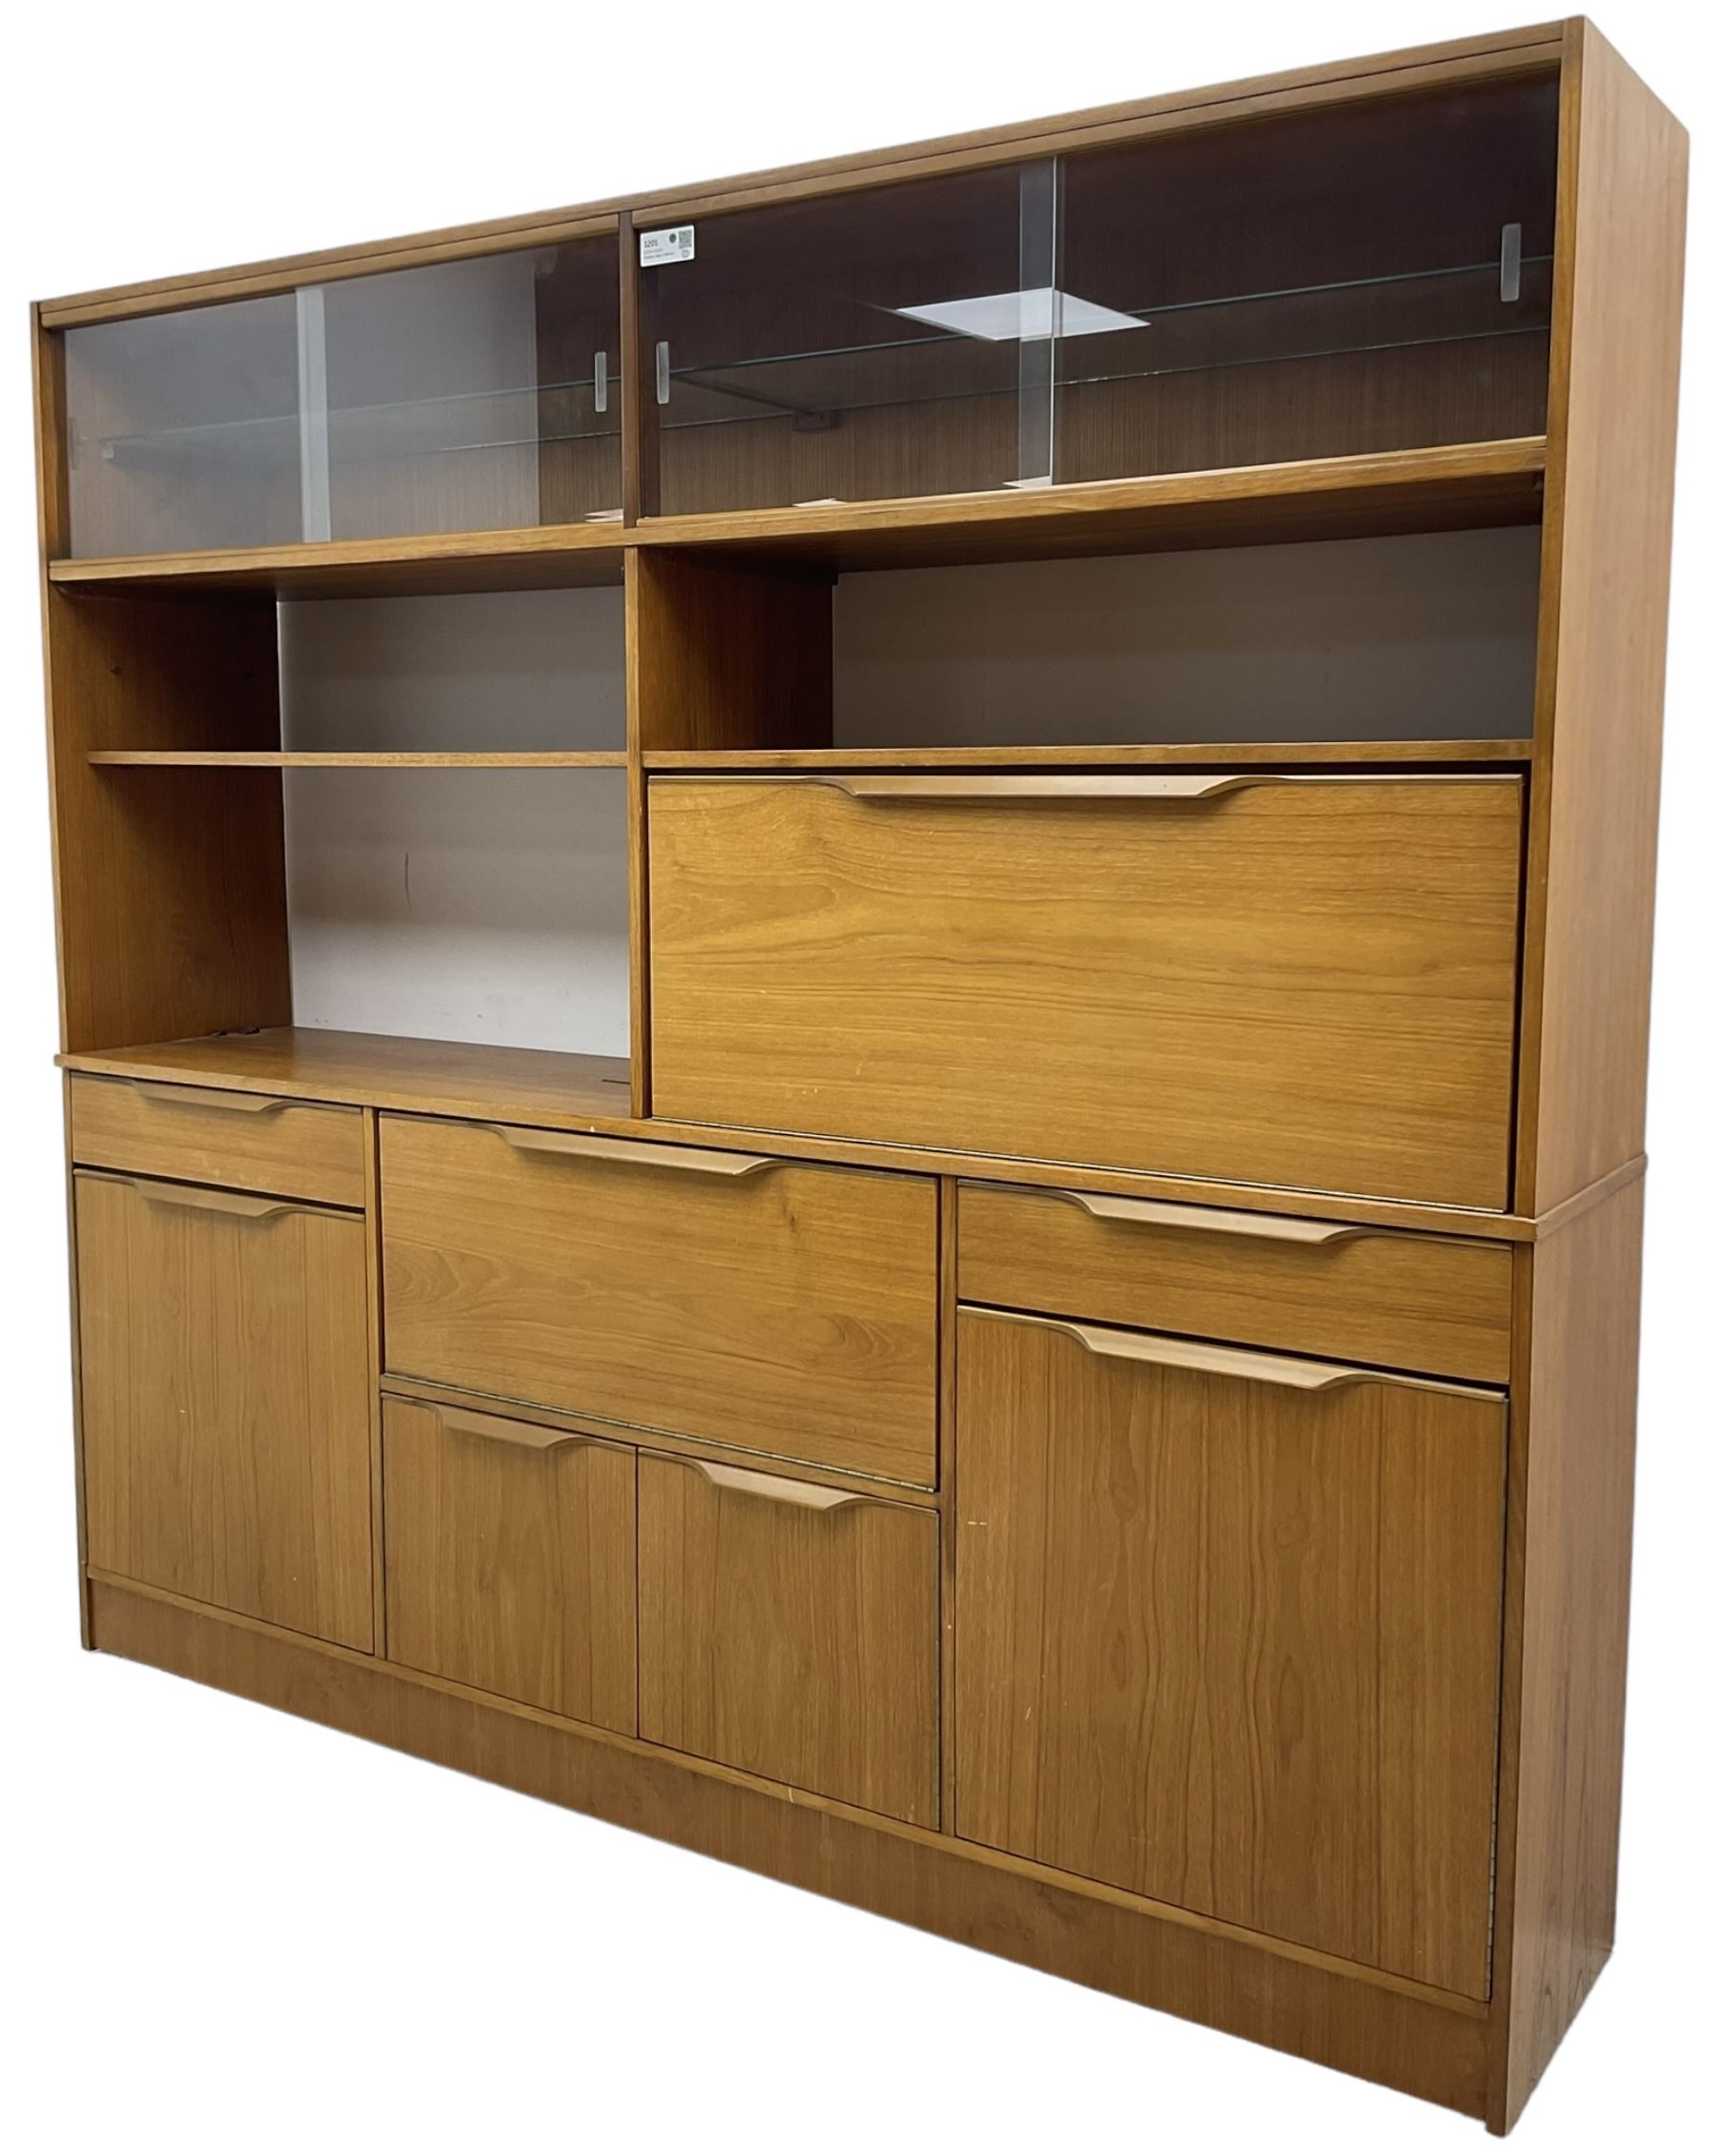 Mid-20th century teak sectional wall unit - Image 2 of 6